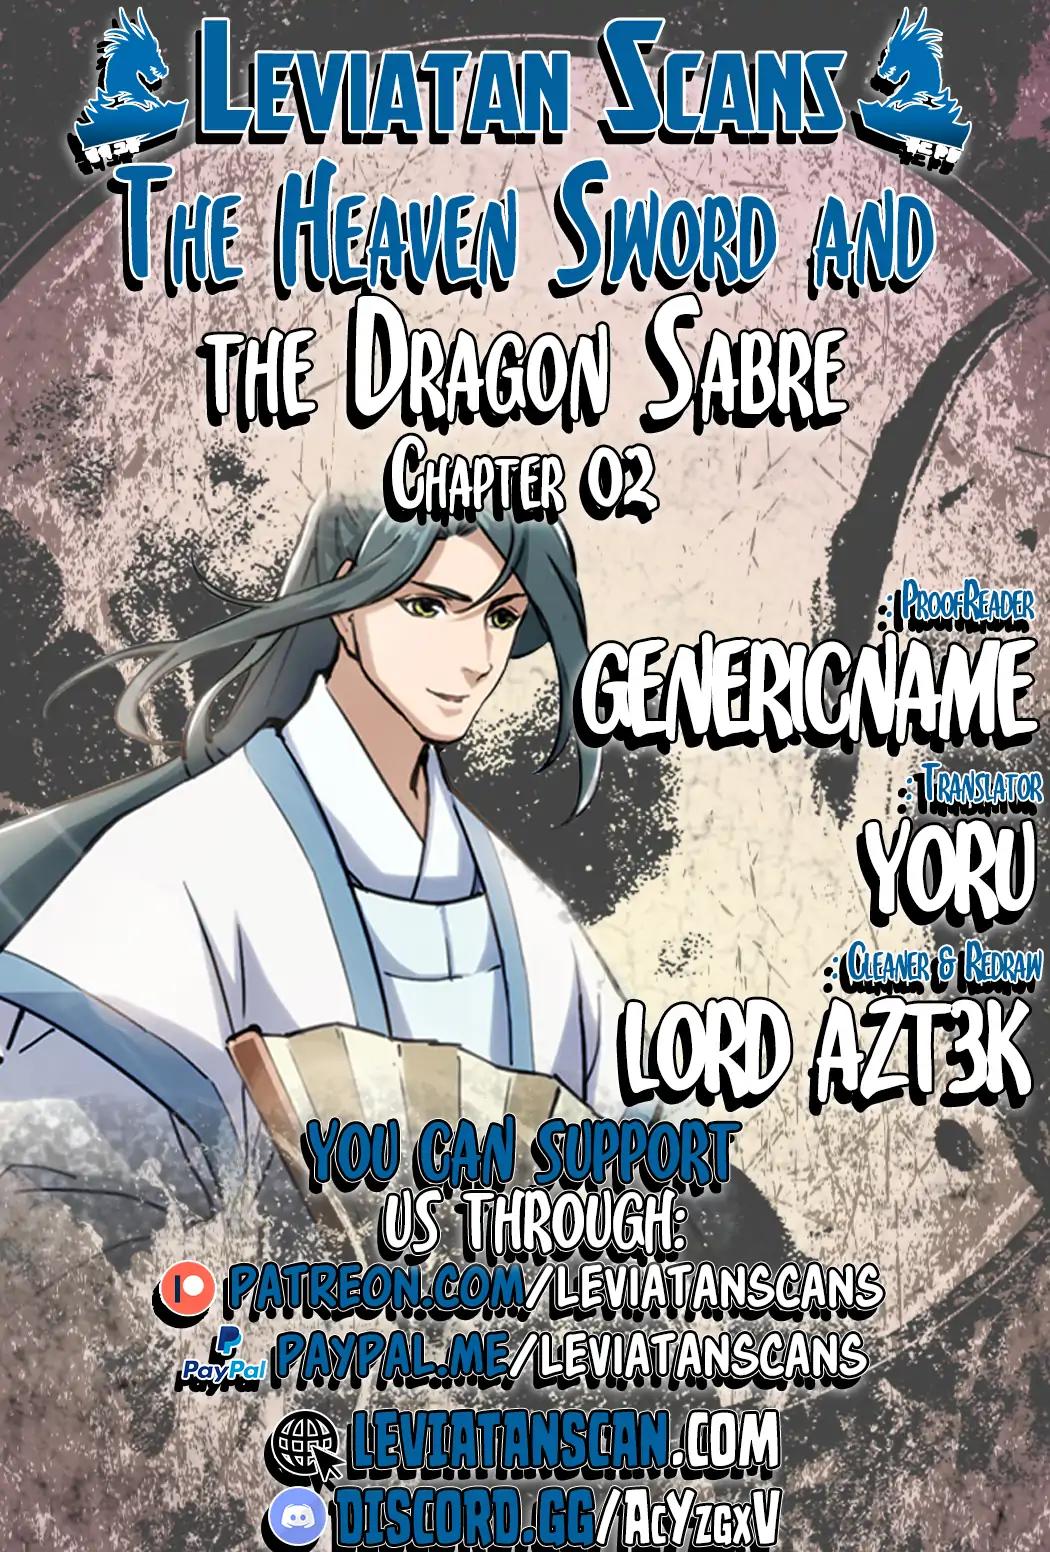 The Heaven Sword and the Dragon Saber Vol.1 Chapter 3